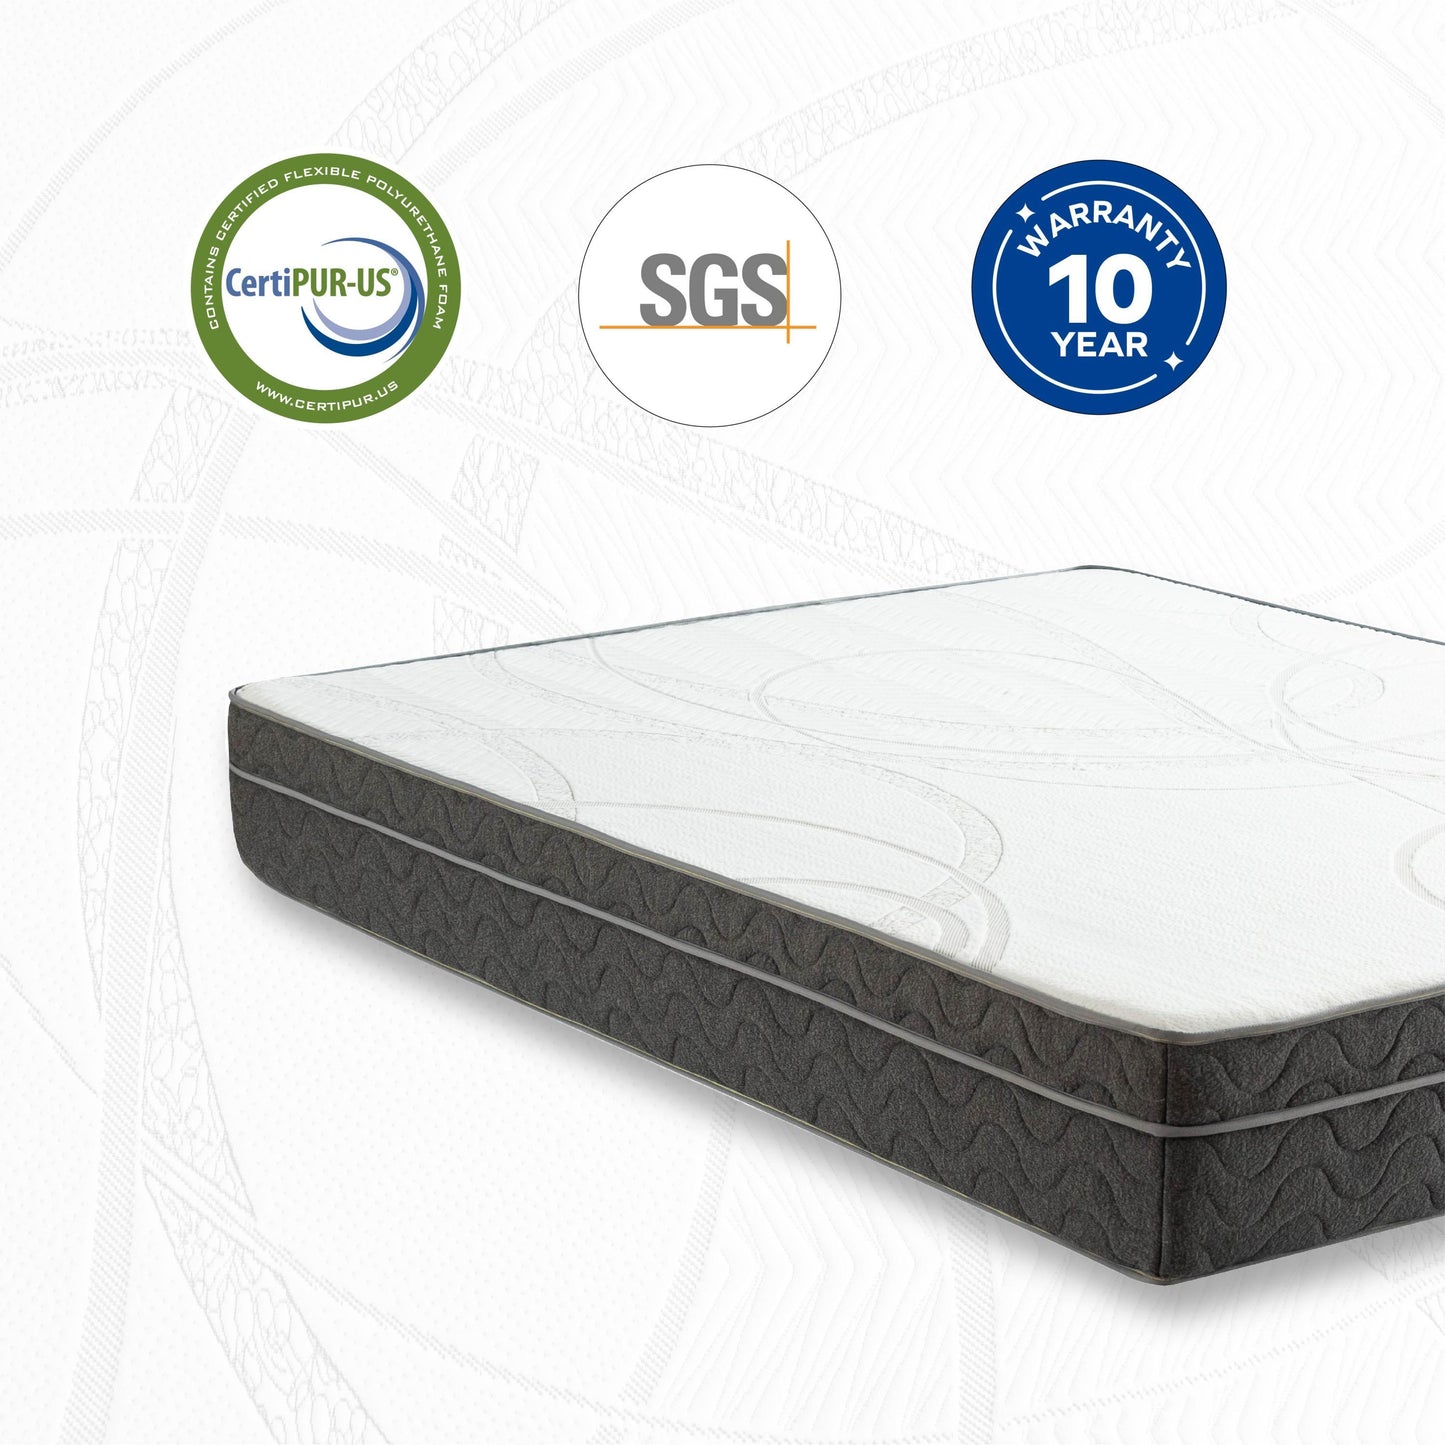 EGO Hybrid 10 Inch Full Mattress, Cooling Gel Infused Memory Foam and Individual Pocket Spring Mattress, Made in USA, Mattress in a Box, CertiPUR-US Certified